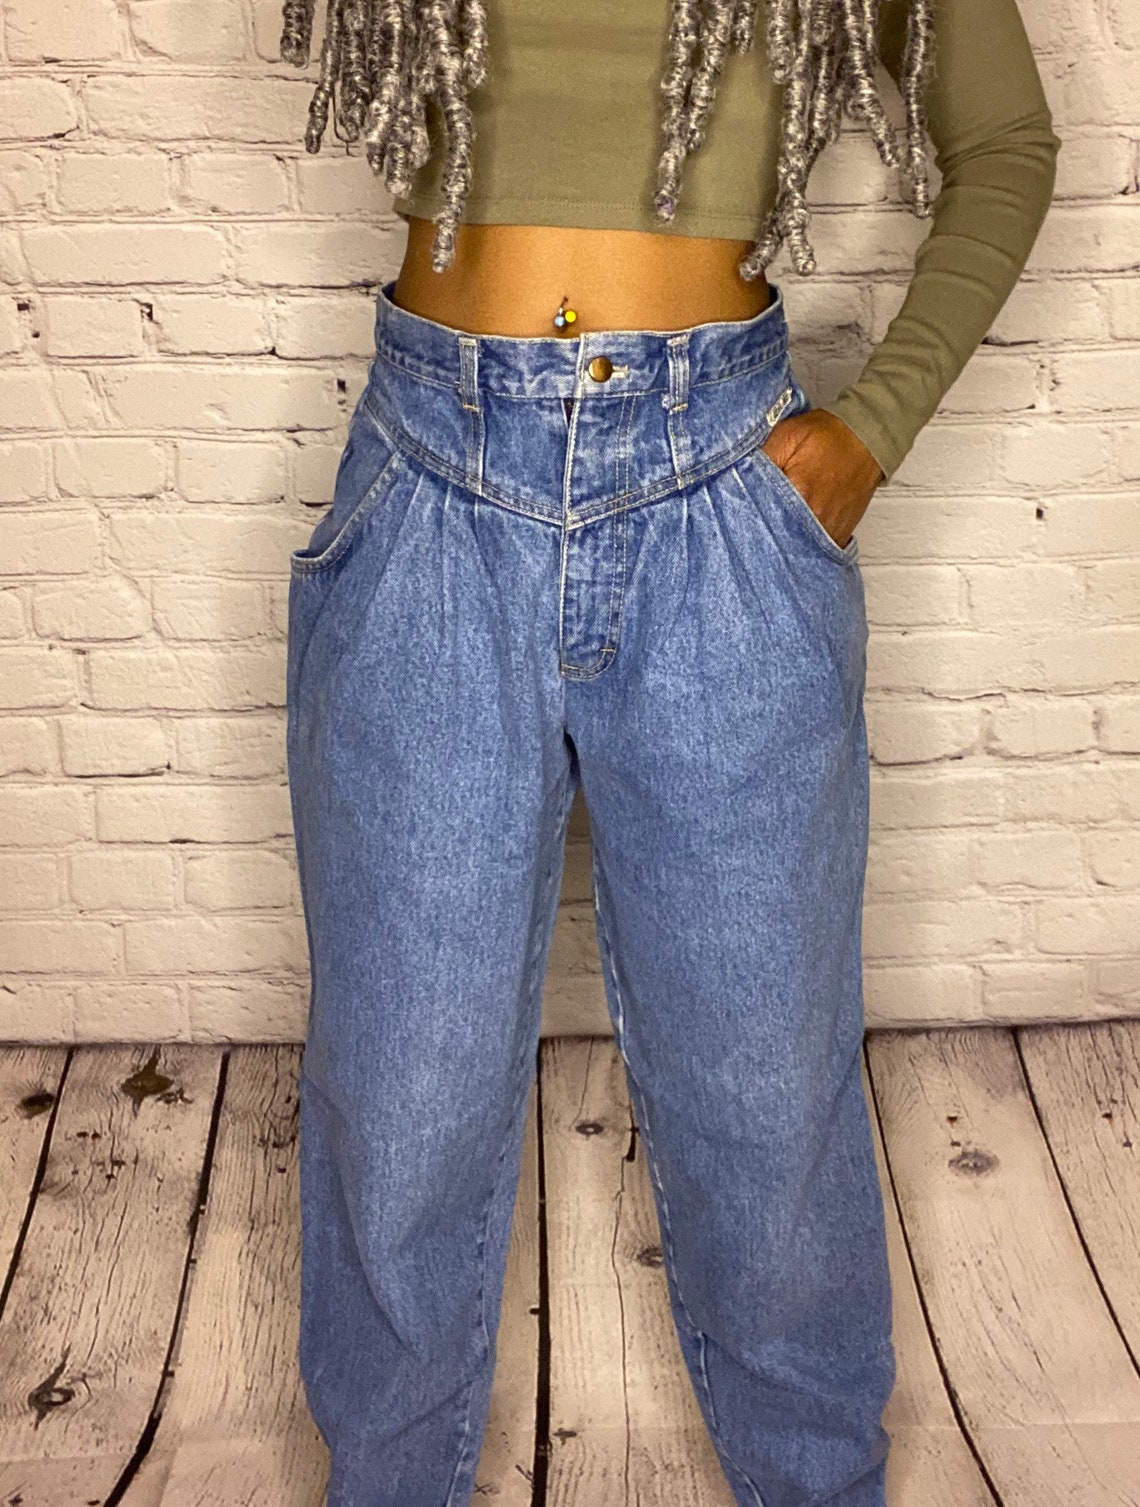 Vintage high waisted jeans | Etsy